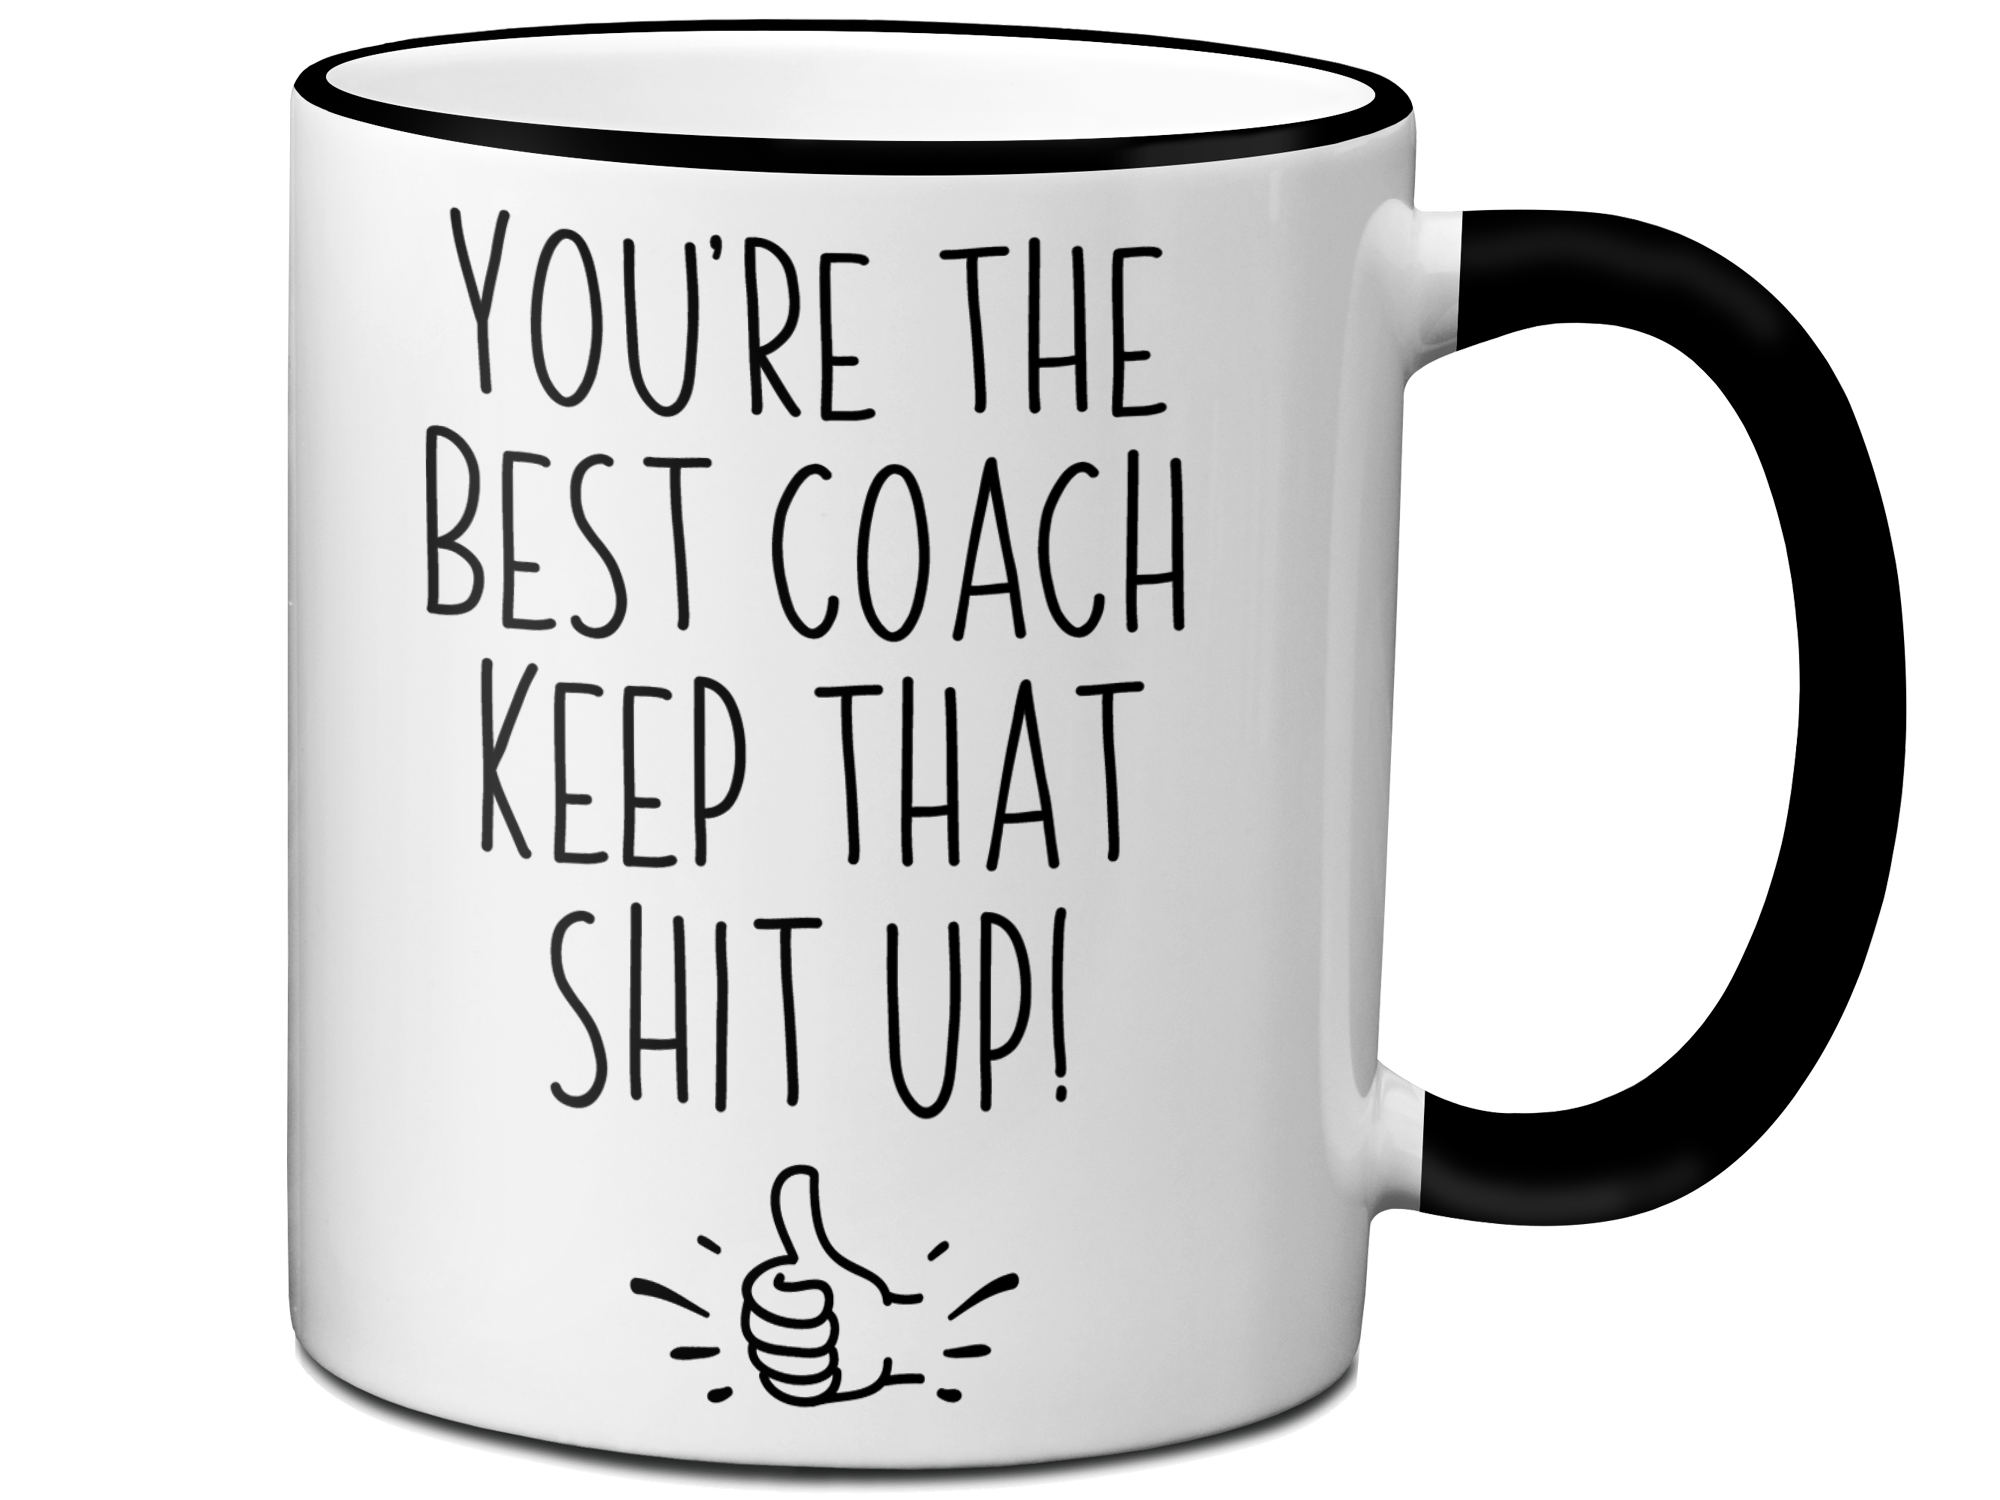 Coach Funny Gifts - You're the Best Coach Keep That Shit Up Gag Coffee Mug